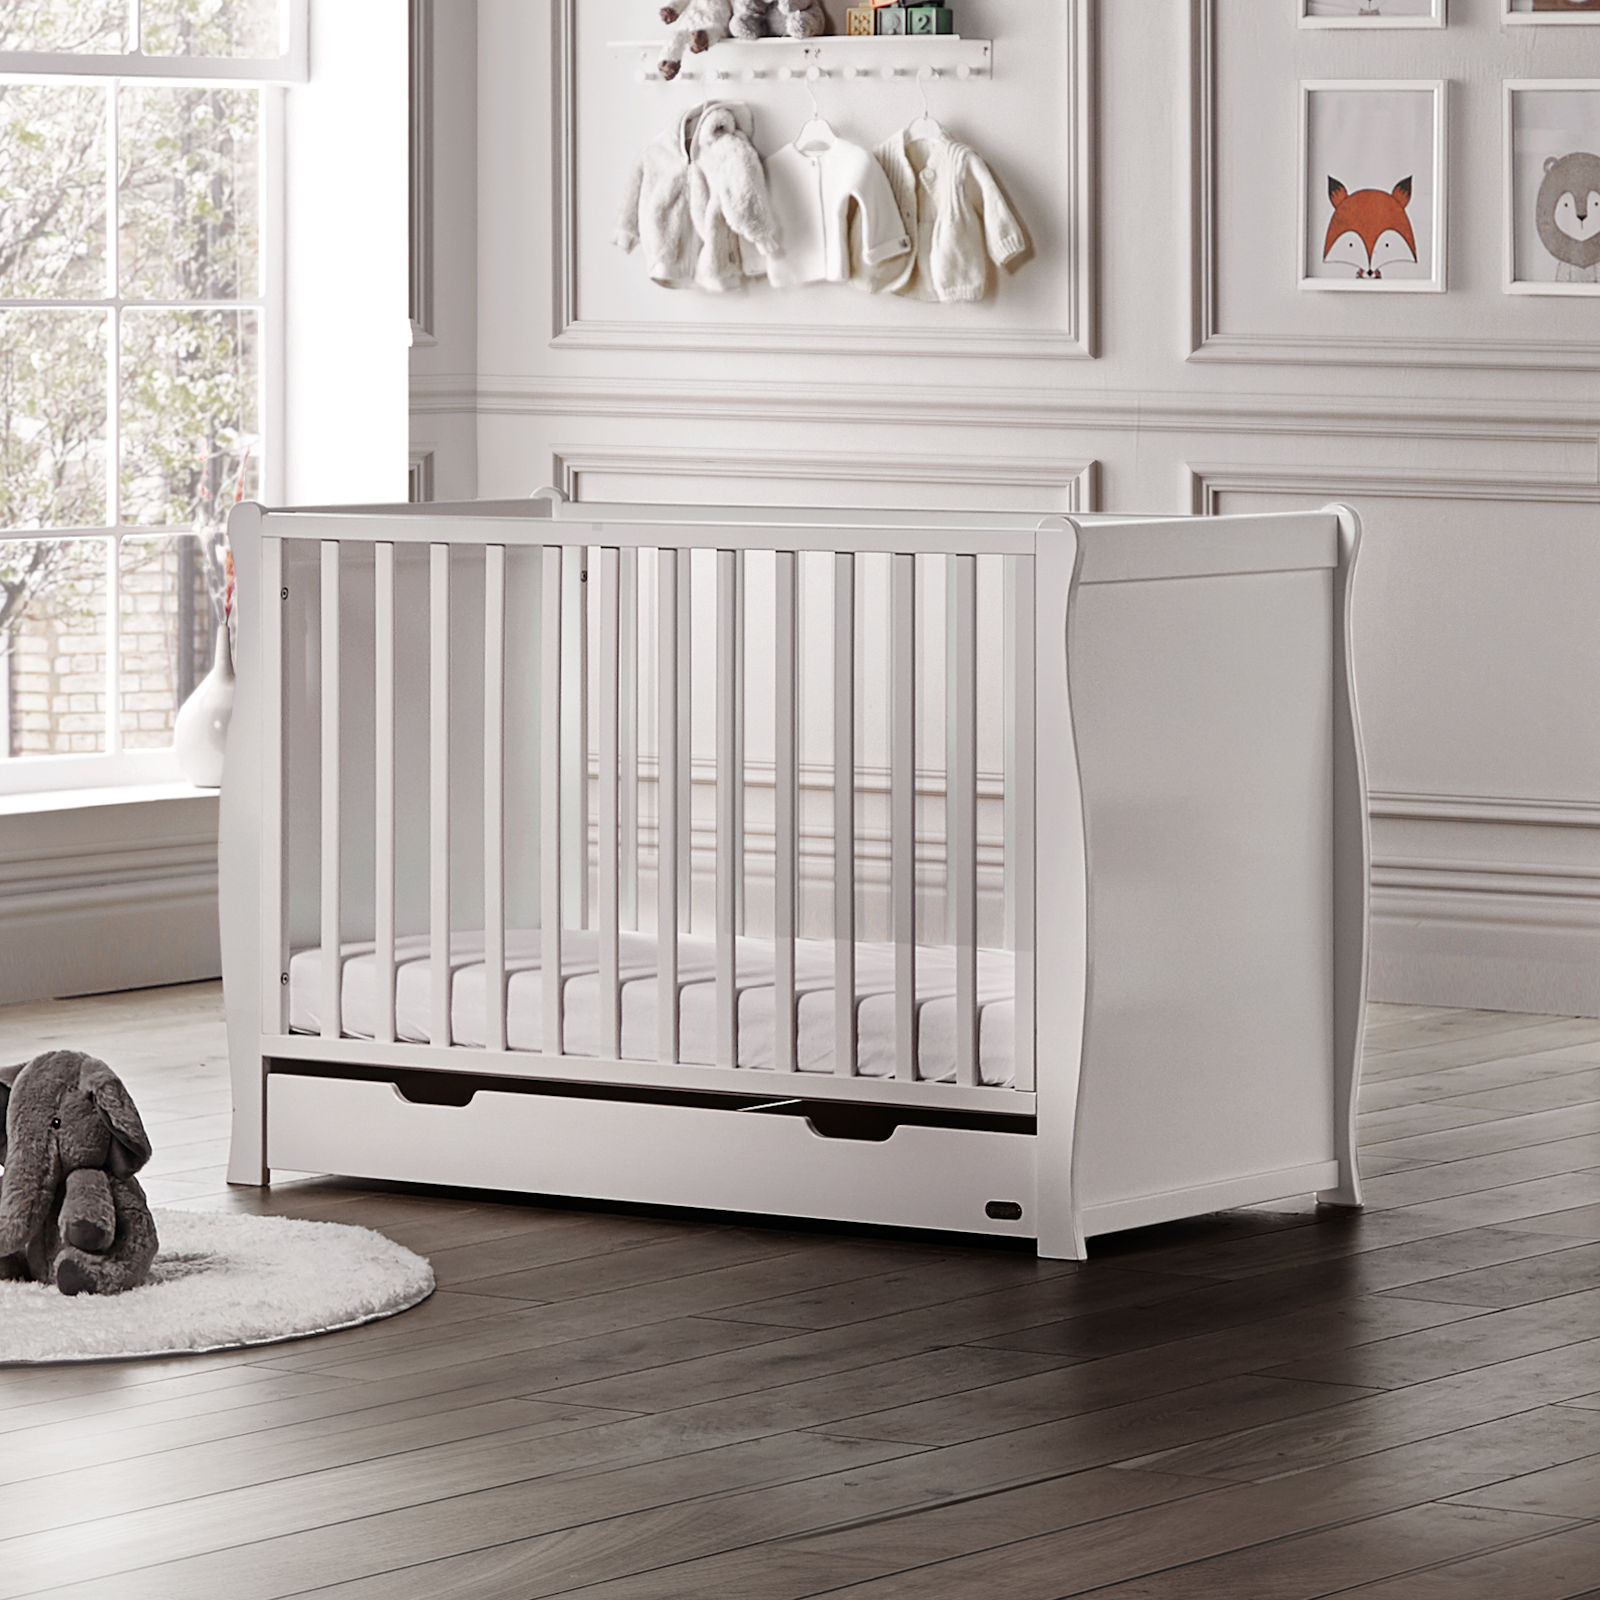 Puggle Chelford Sleigh Cot With Drawer & Eco Fibre Cot Mattress - White